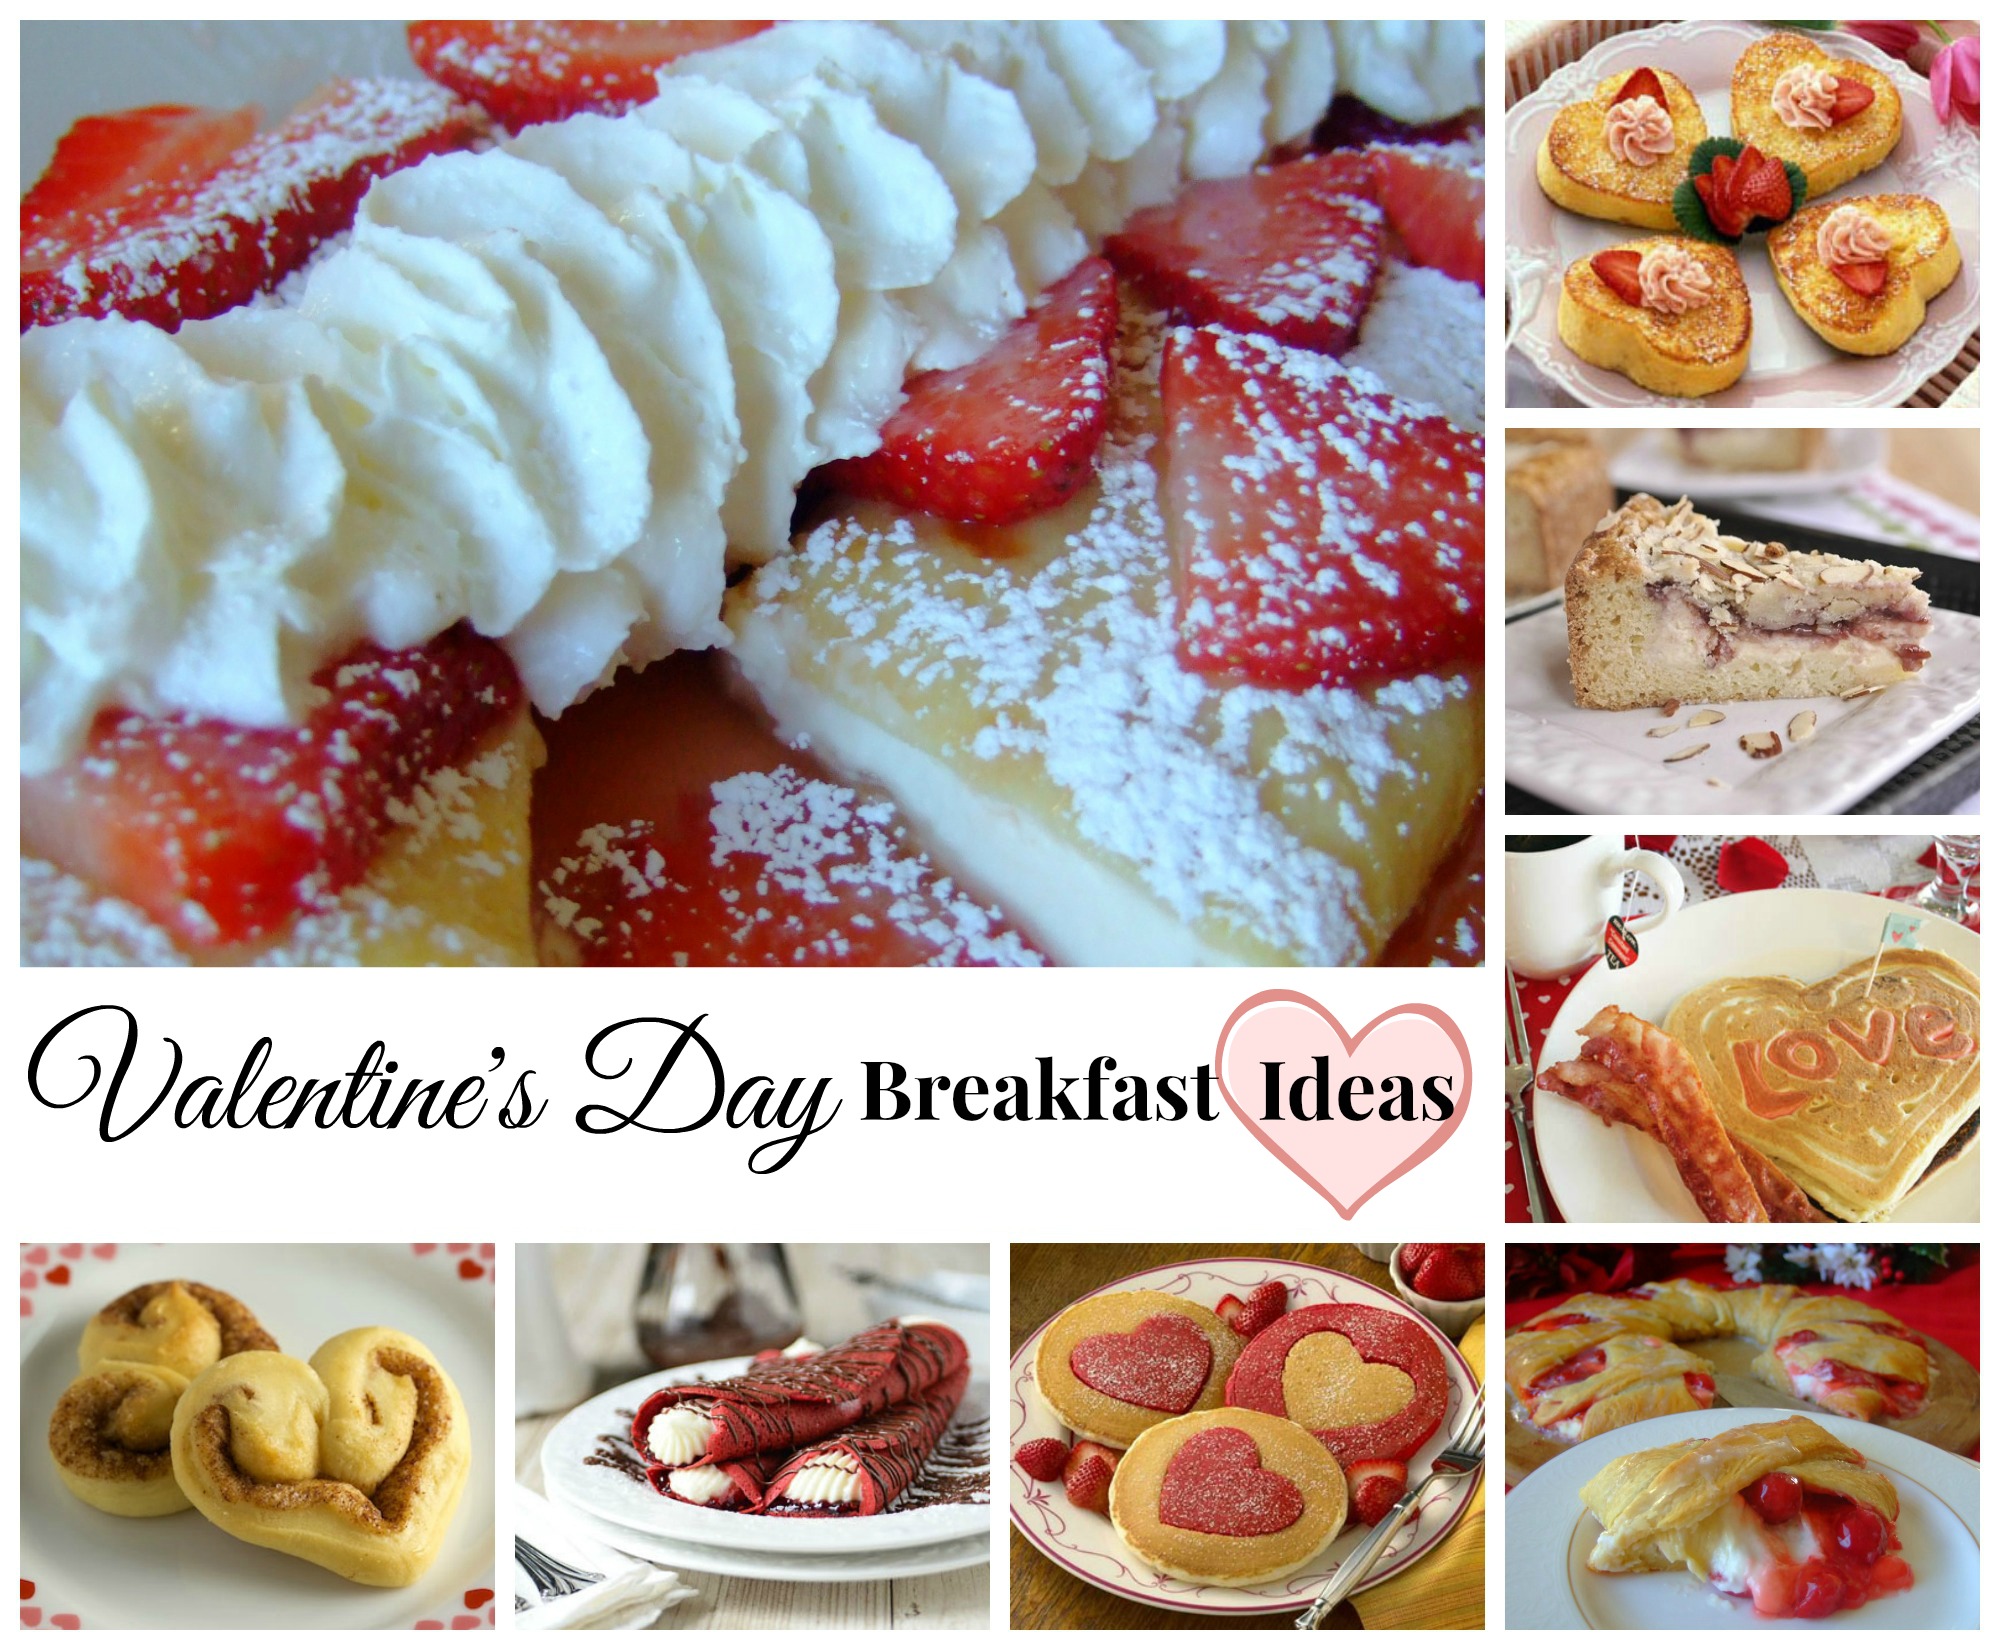 Valentine’s Day Breakfast Ideas and Recipes